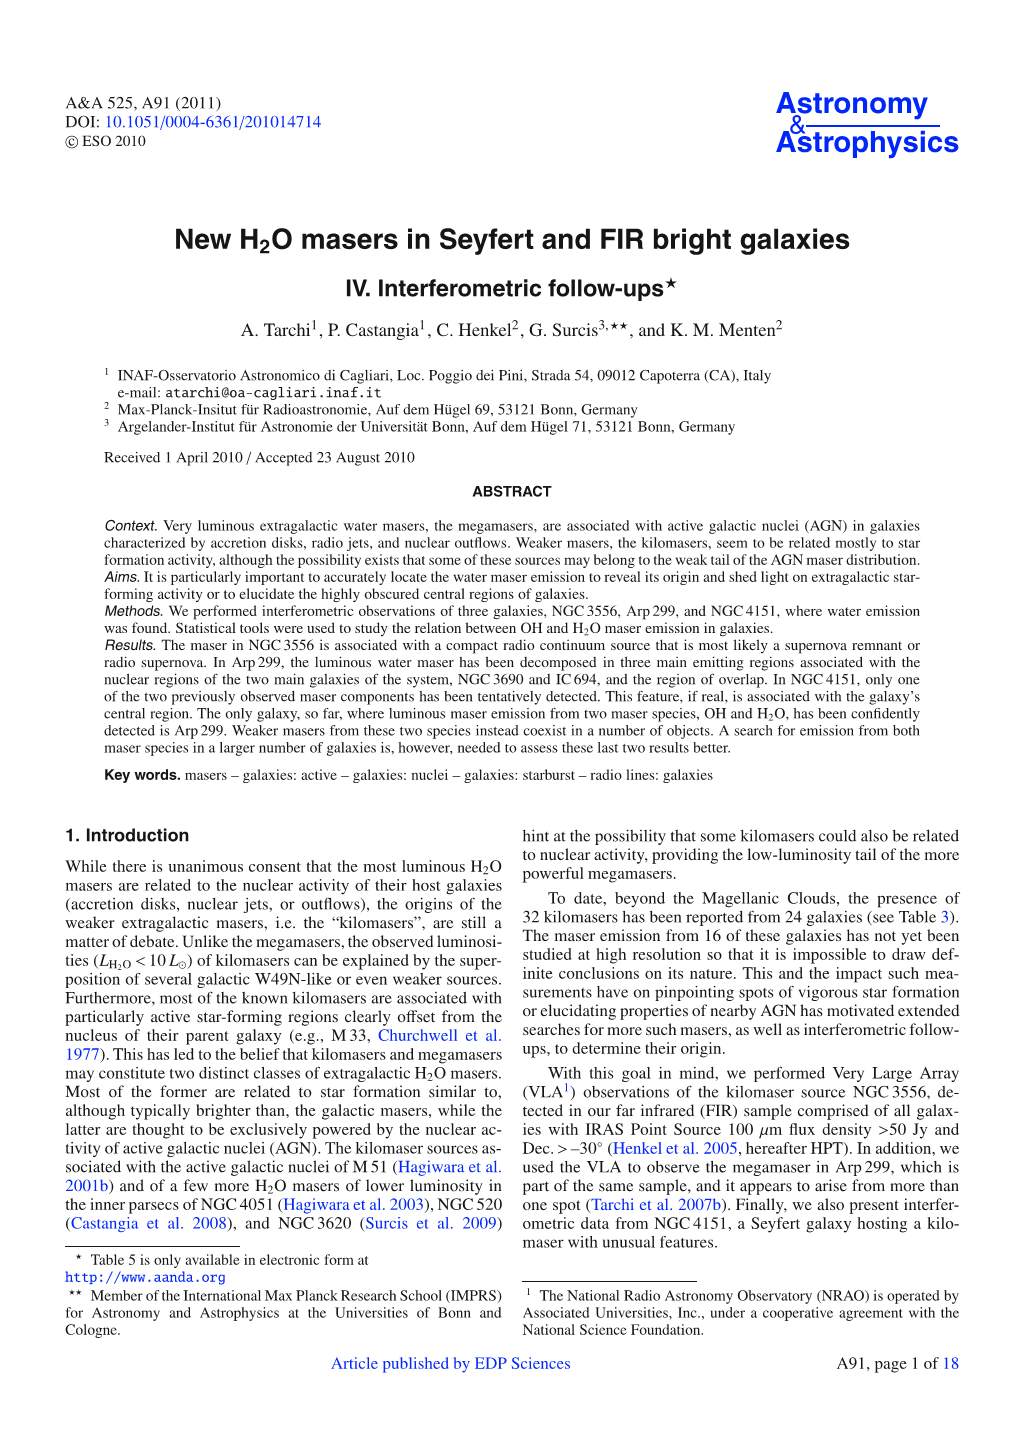 New H2O Masers in Seyfert and FIR Bright Galaxies IV